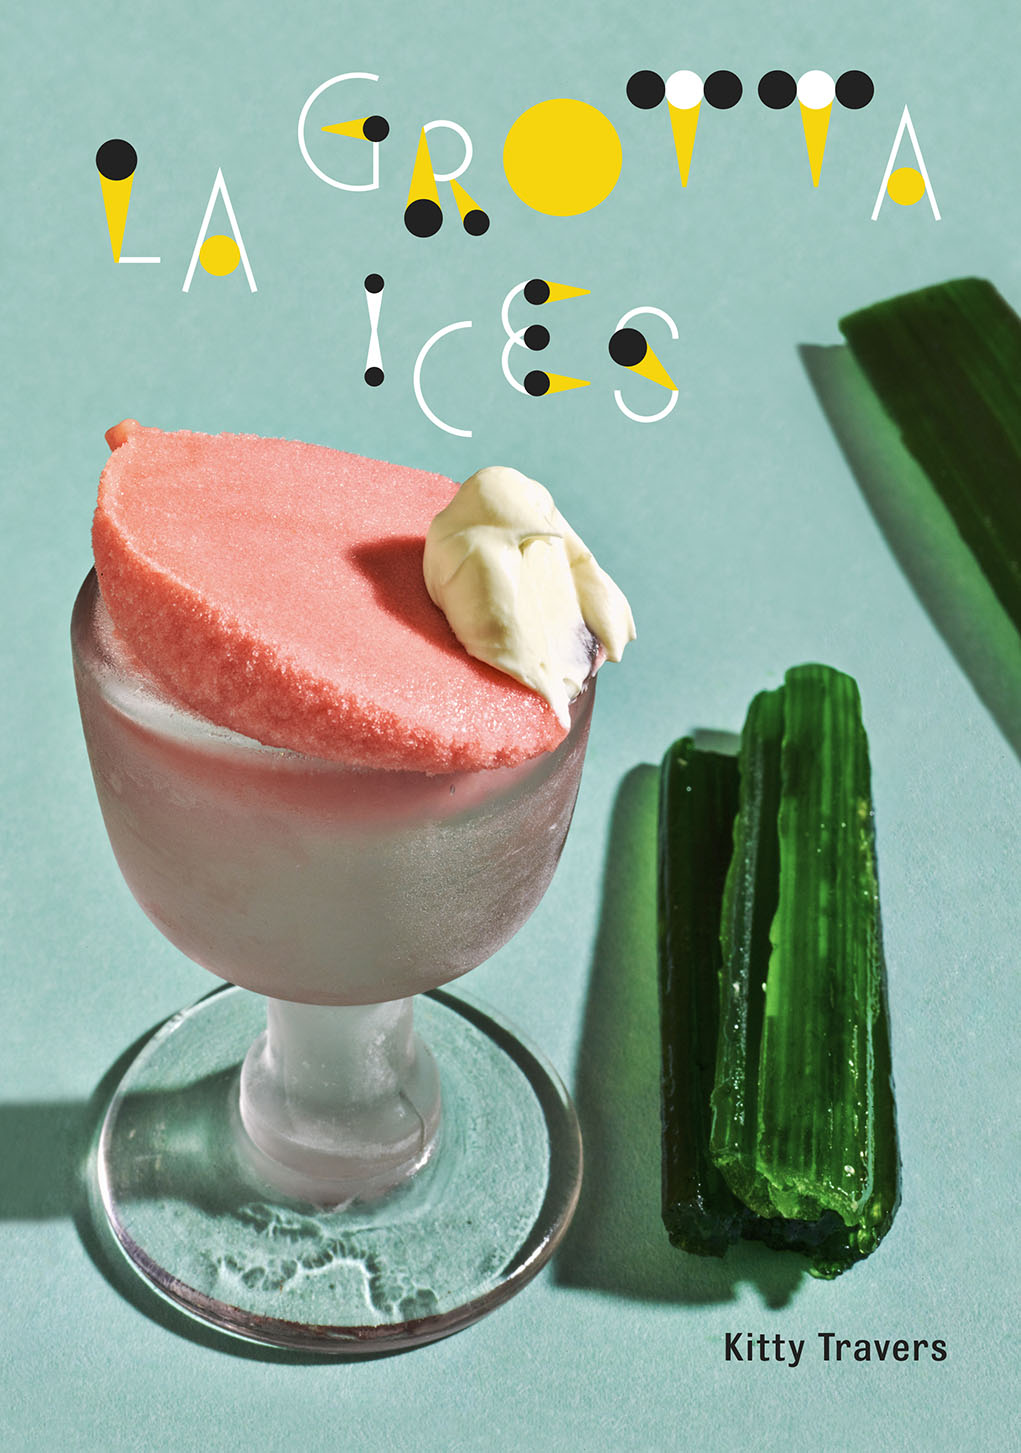 La Grotta Ices book by Kitty Travers